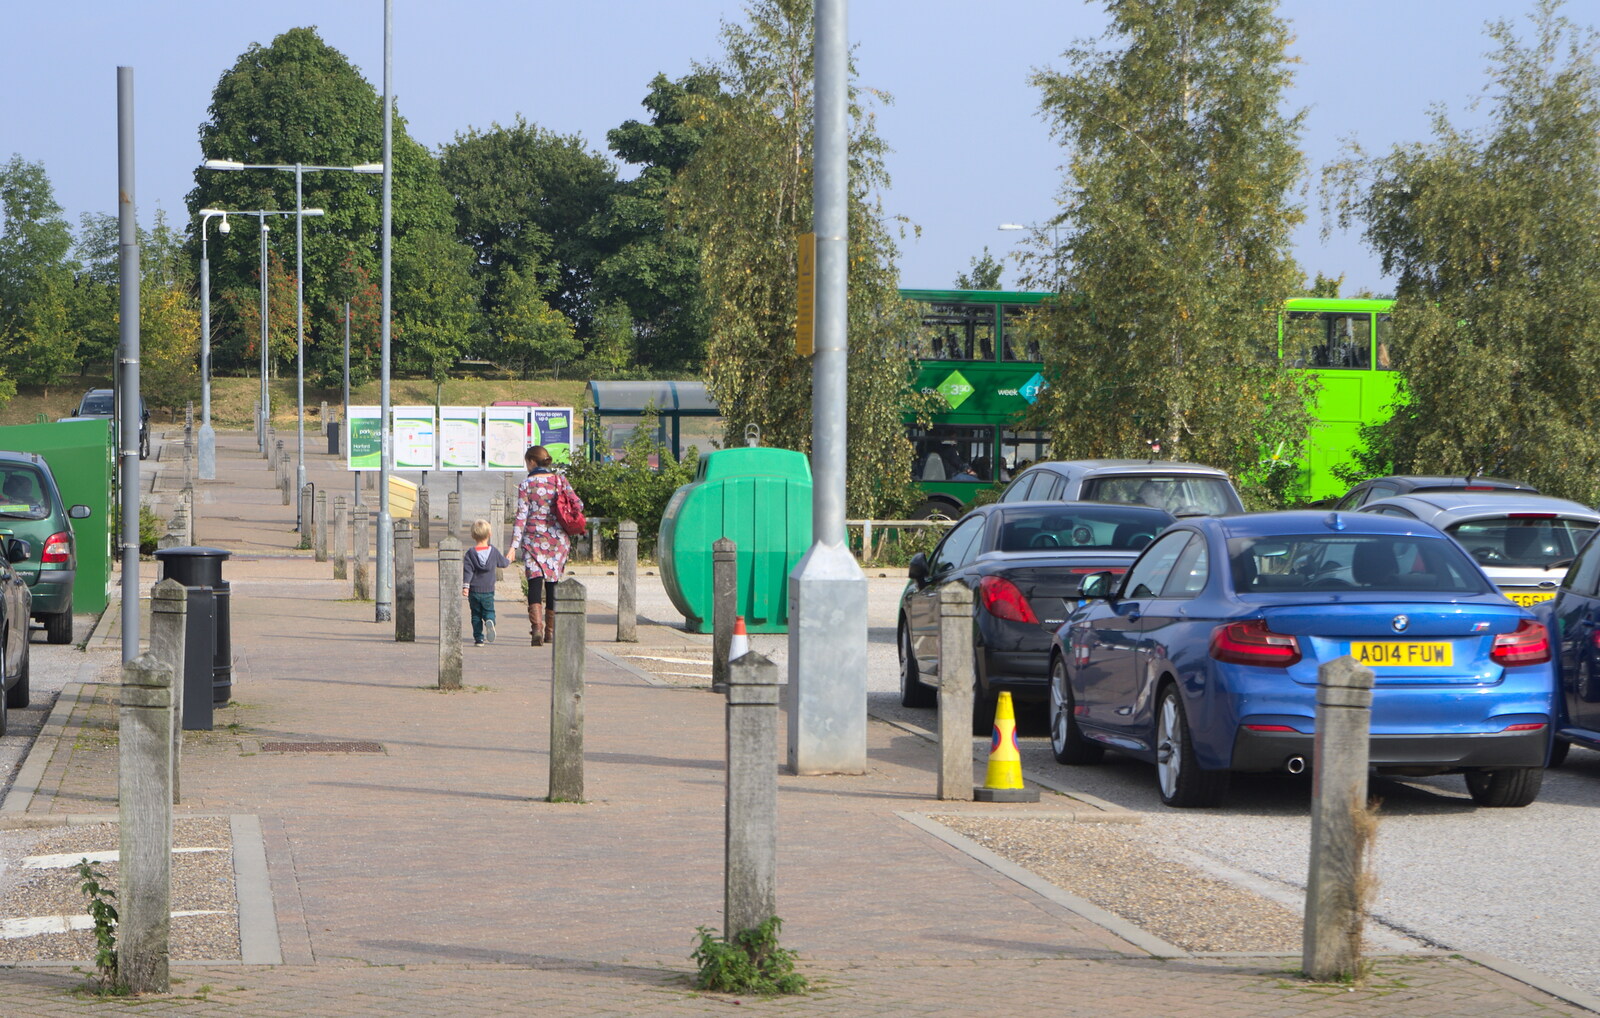 Harry and Isobel at the Park and Ride in Norwich from Fred's Lego, a Giant Clock, and a Trip to Norwich, Norfolk - 25th September 2015